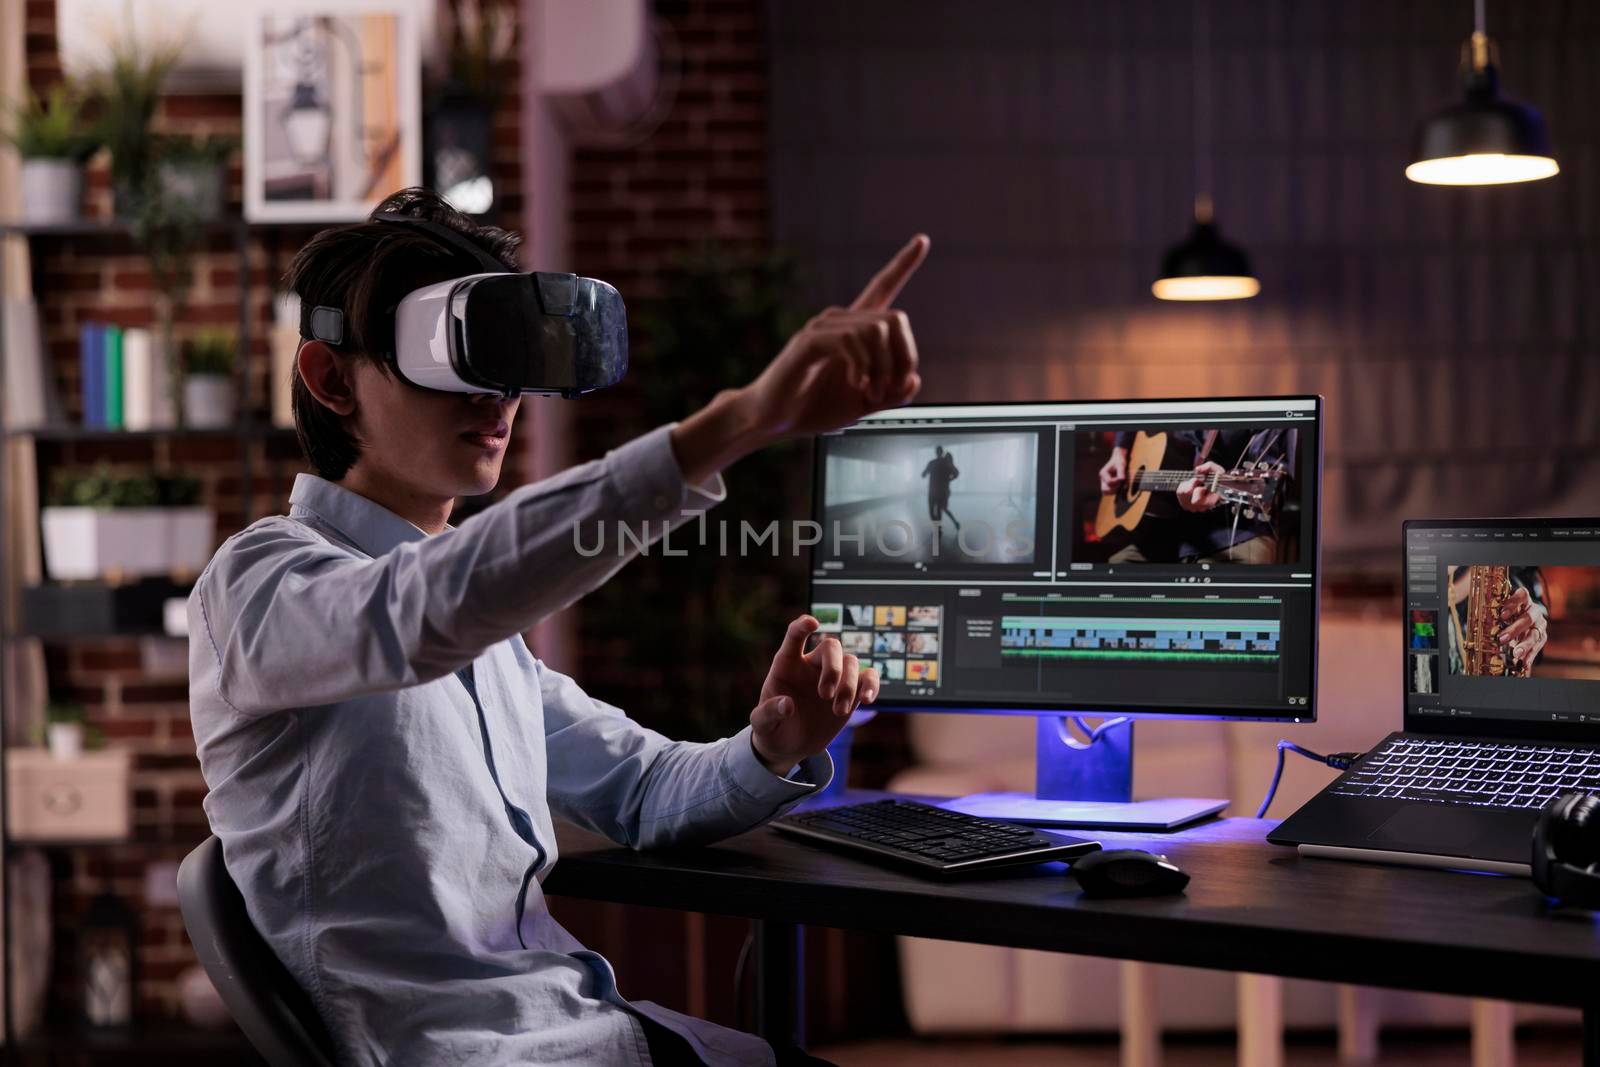 Film maker editing movie montage with virtual reality glasses, using multimedia production software to create footage. Edit video with color grading and visual effects, working with vr goggles.